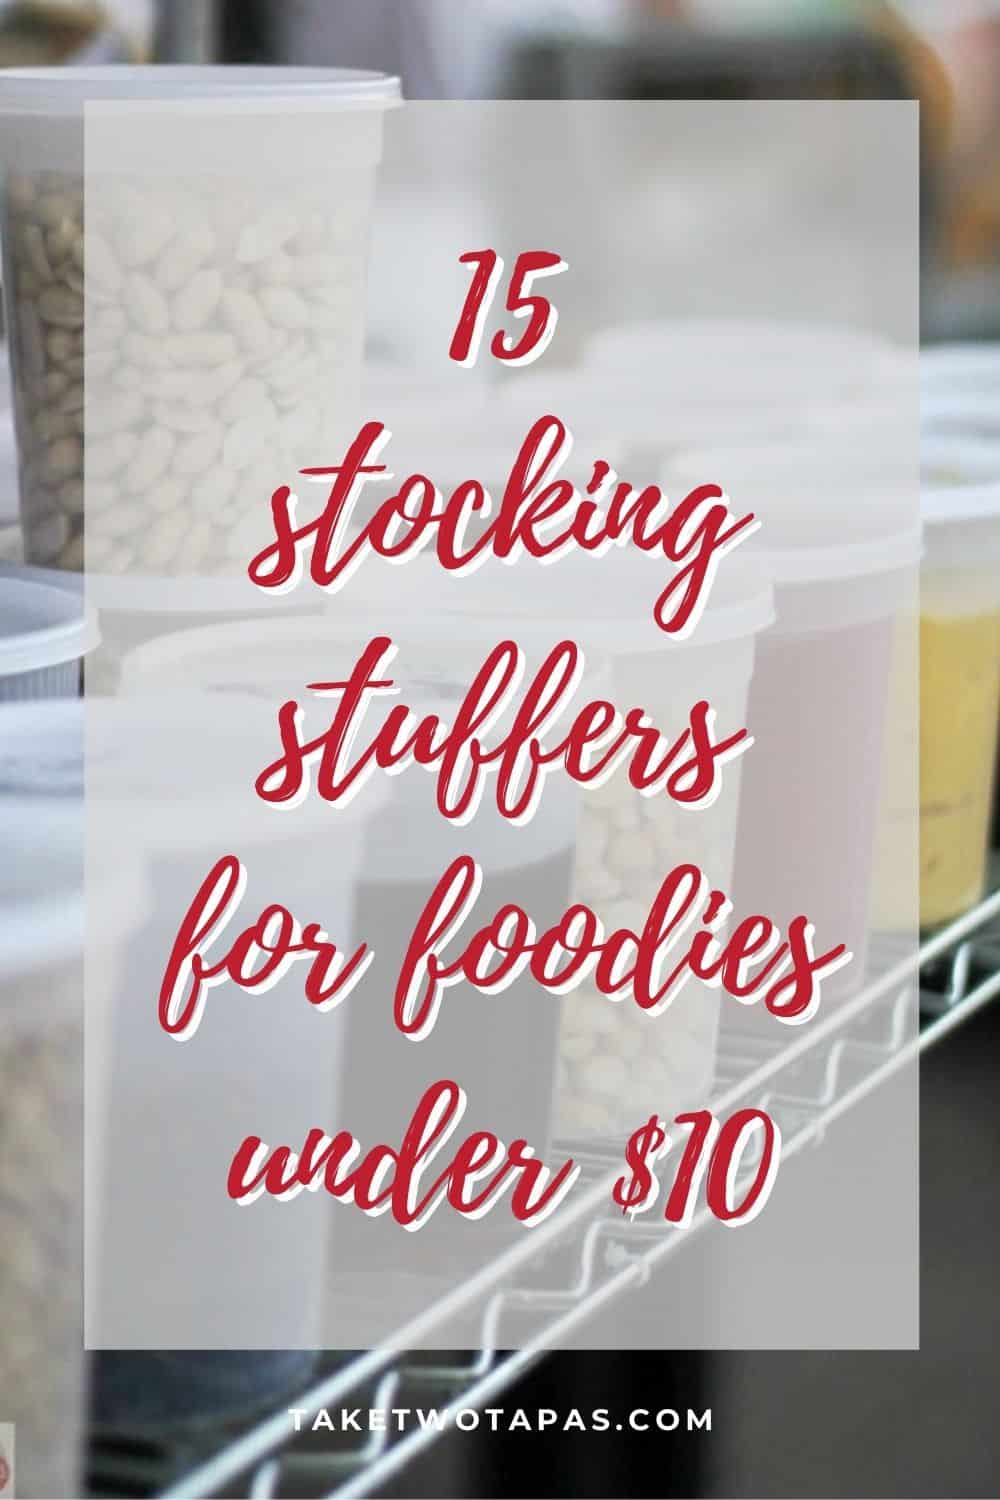 blurred picture with text "15 stocking stuffers for foodies under $10